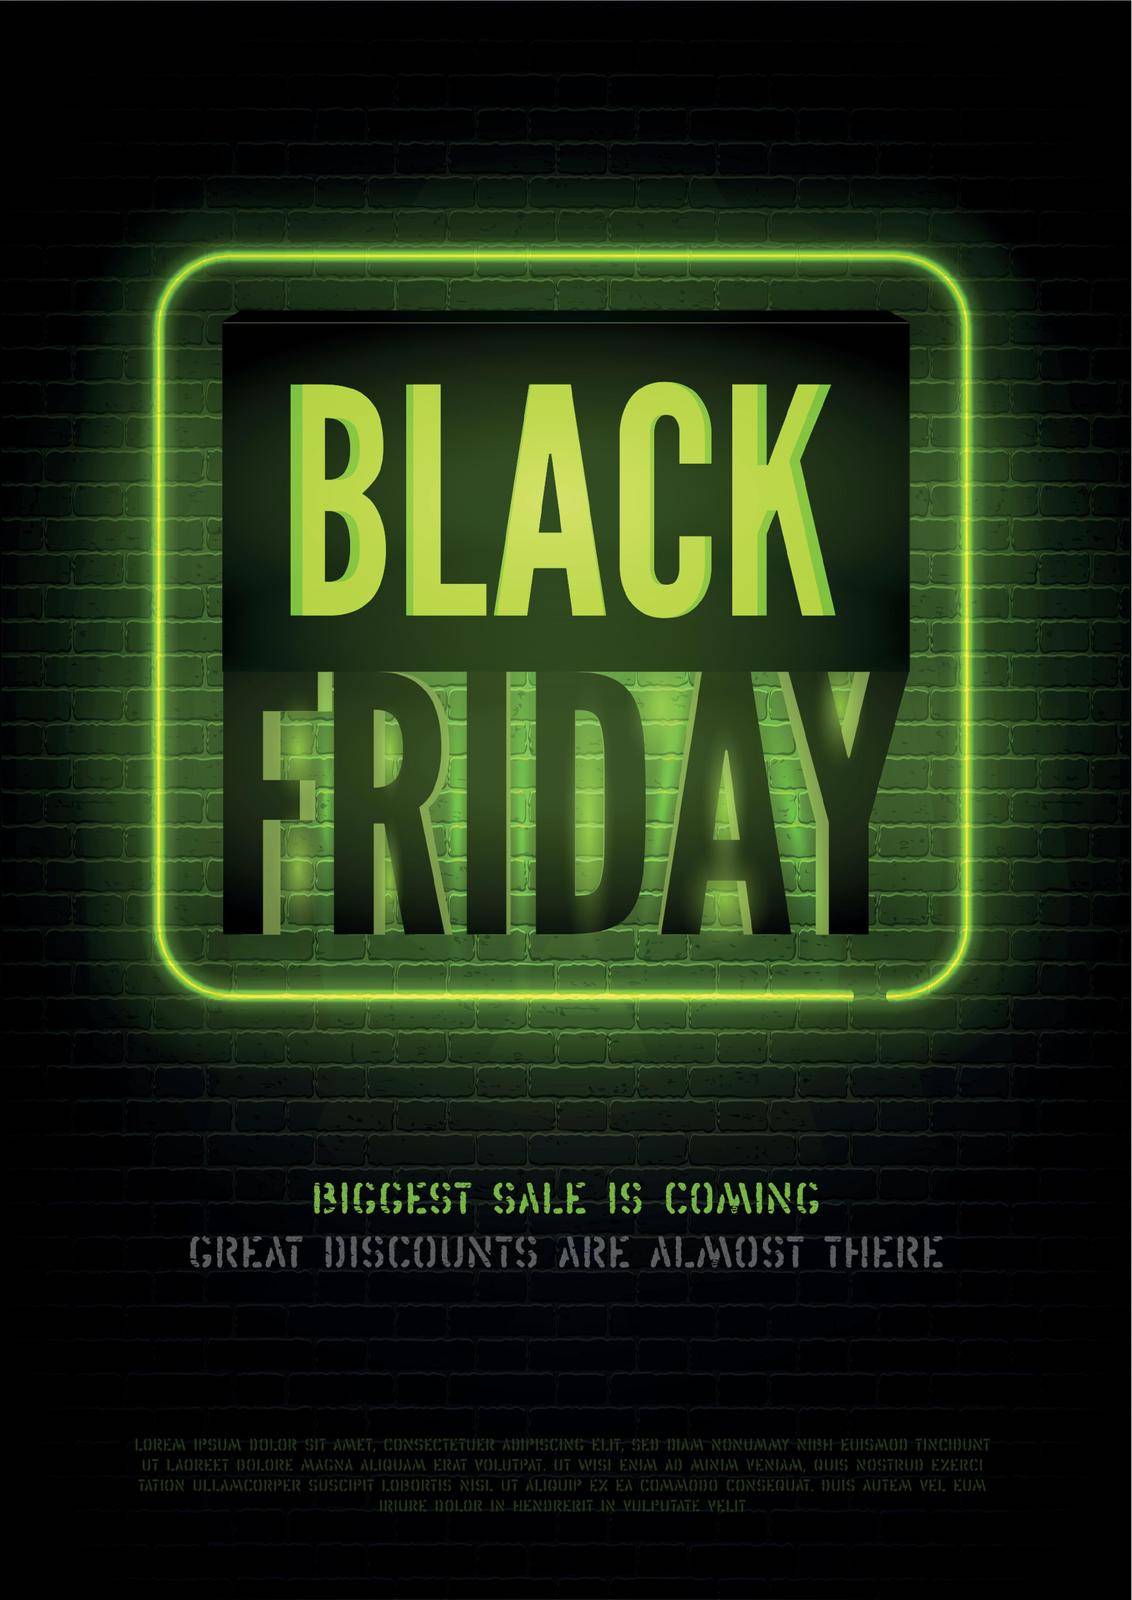 Biggest black friday discounts vector flyer template. Mega wholesale advert with text space. Special price offer on stylized brick wall background. Seasonal sale promo banner design